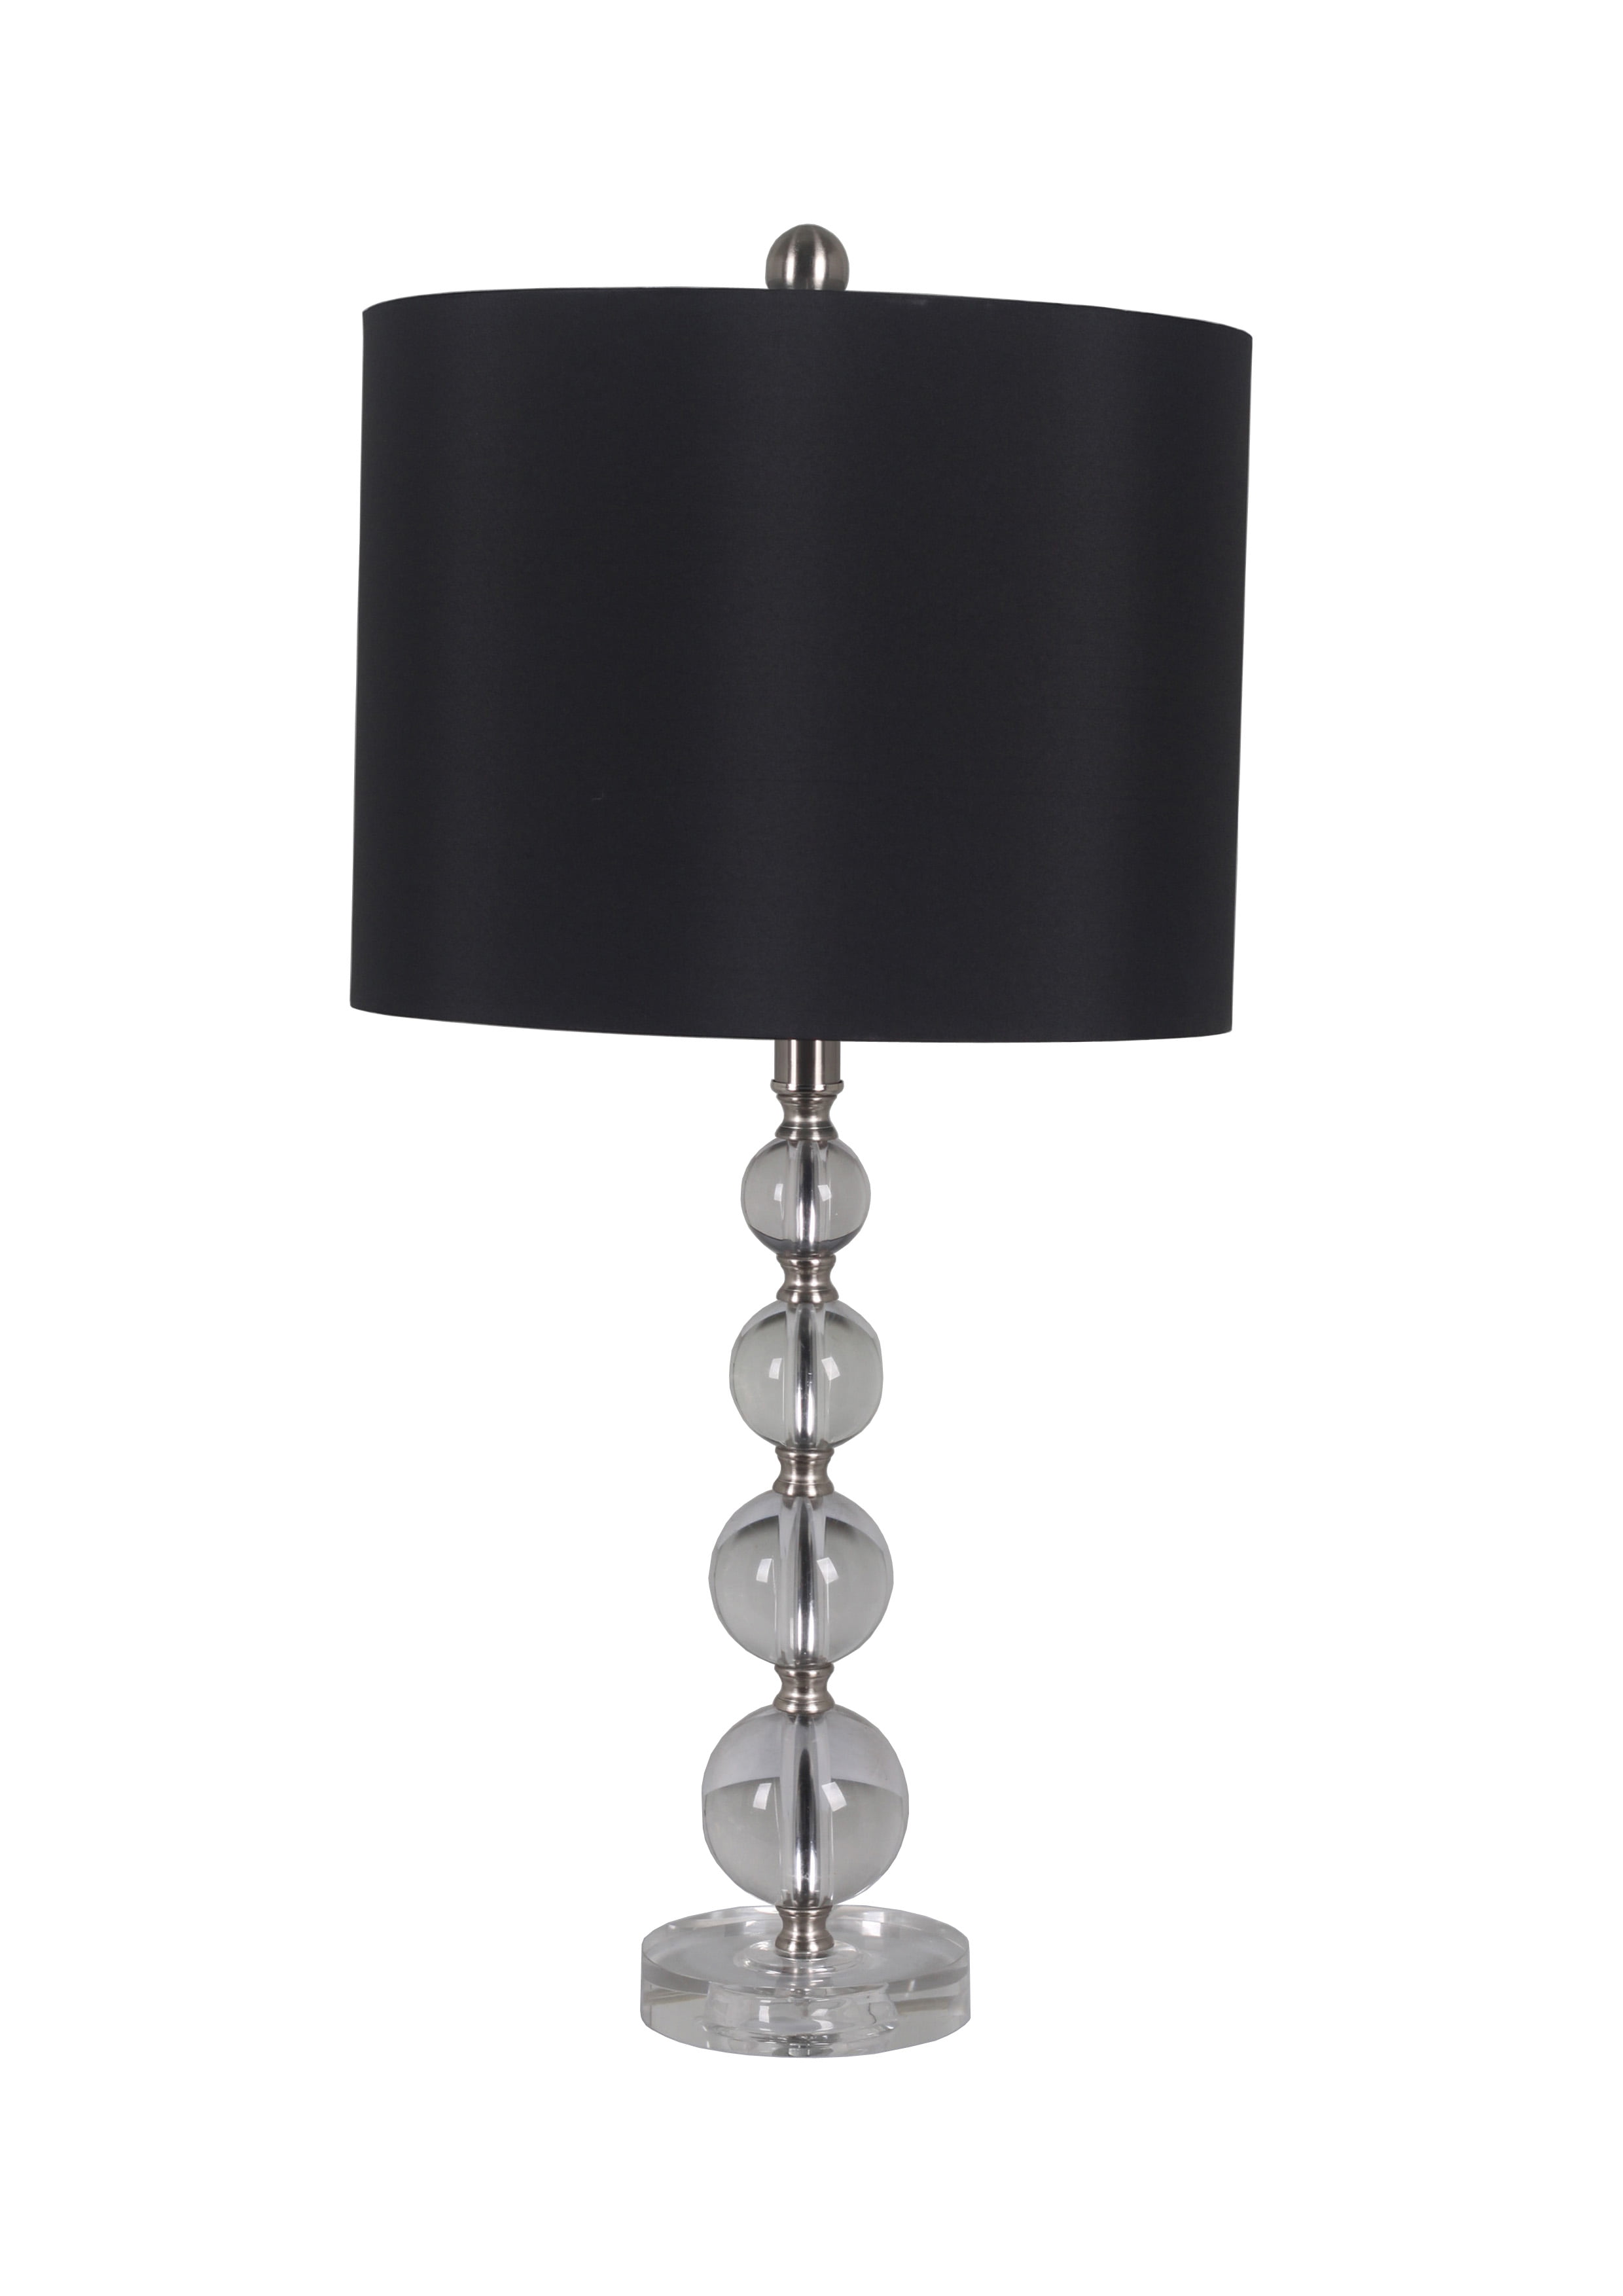 Black Linen Drum Lamp Shade, Acrylic Stacked Ball Table Lamp